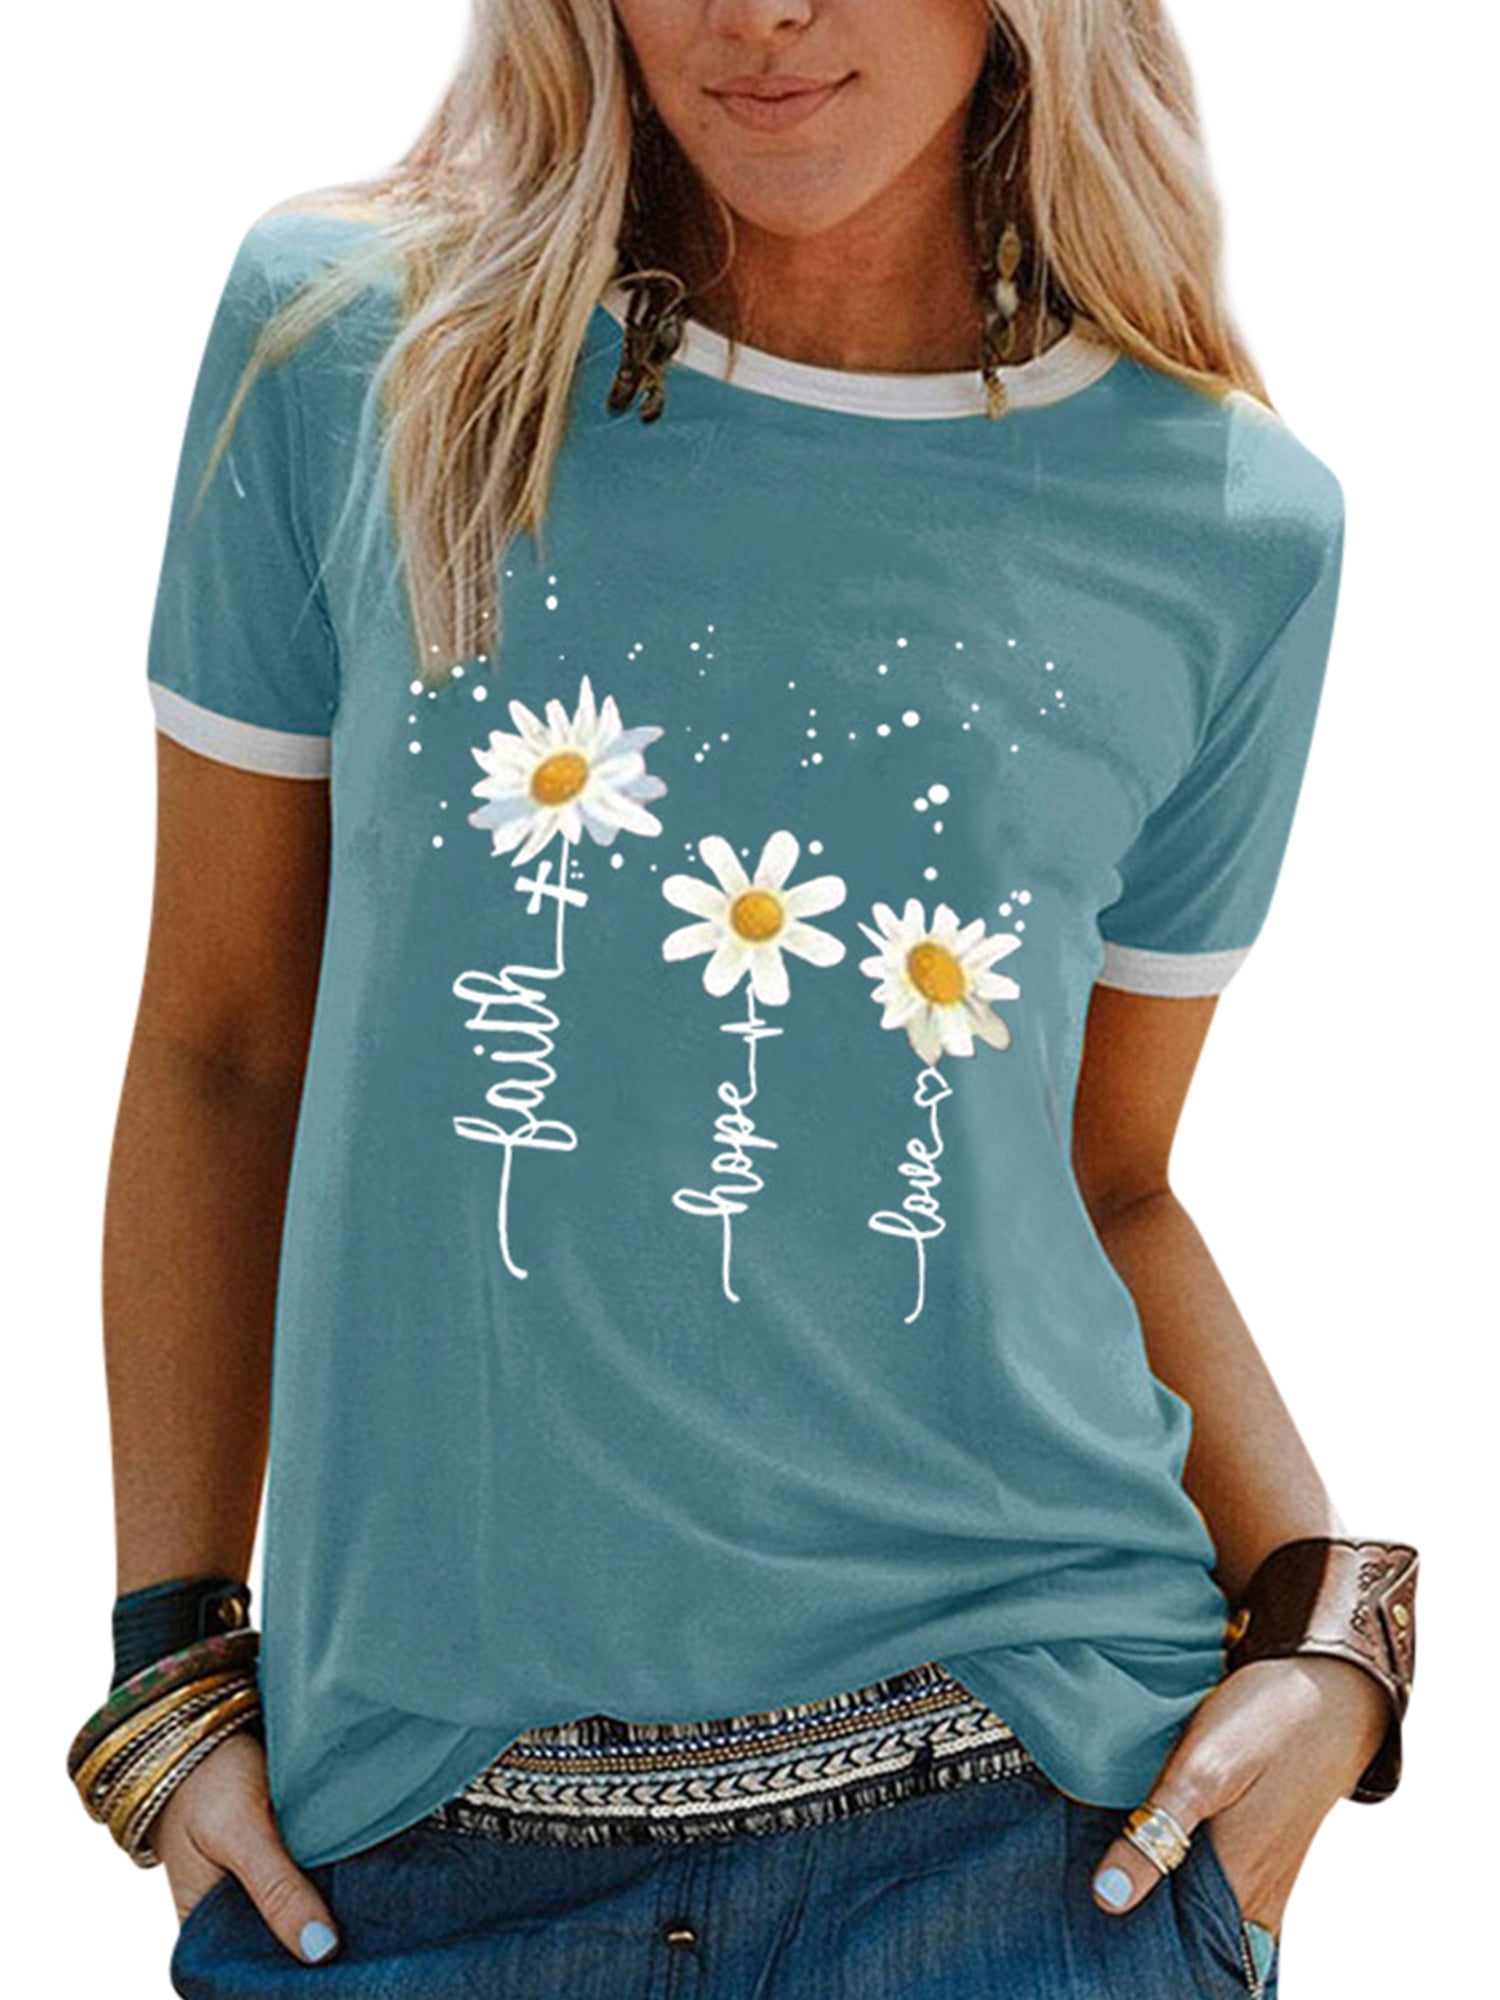 Dandelion Sunflower Graphic Tshirts Short Sleeve Shirts Cute Funny Cute Tees Tops S-3XL BUKINIE Summer Tops for Women 